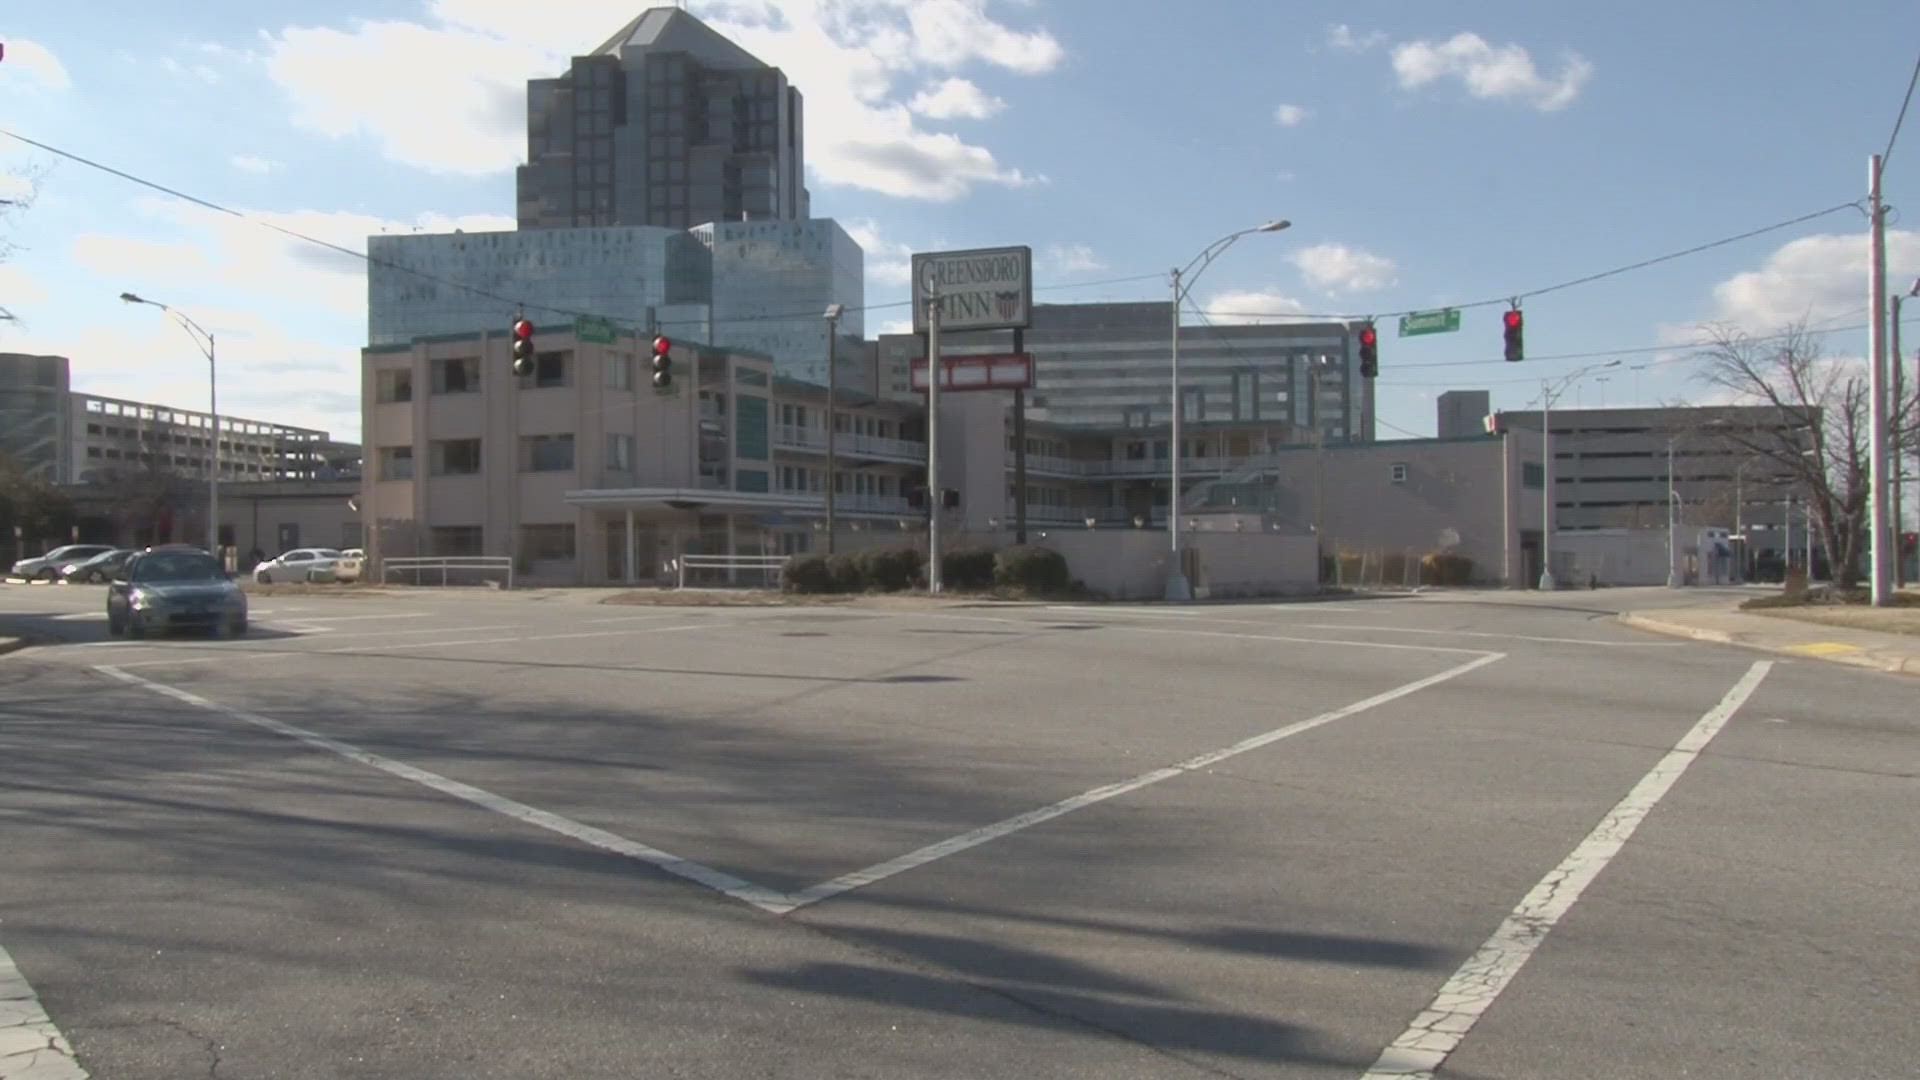 January 19, 2014, was the end of an era for a downtown Greensboro landmark.